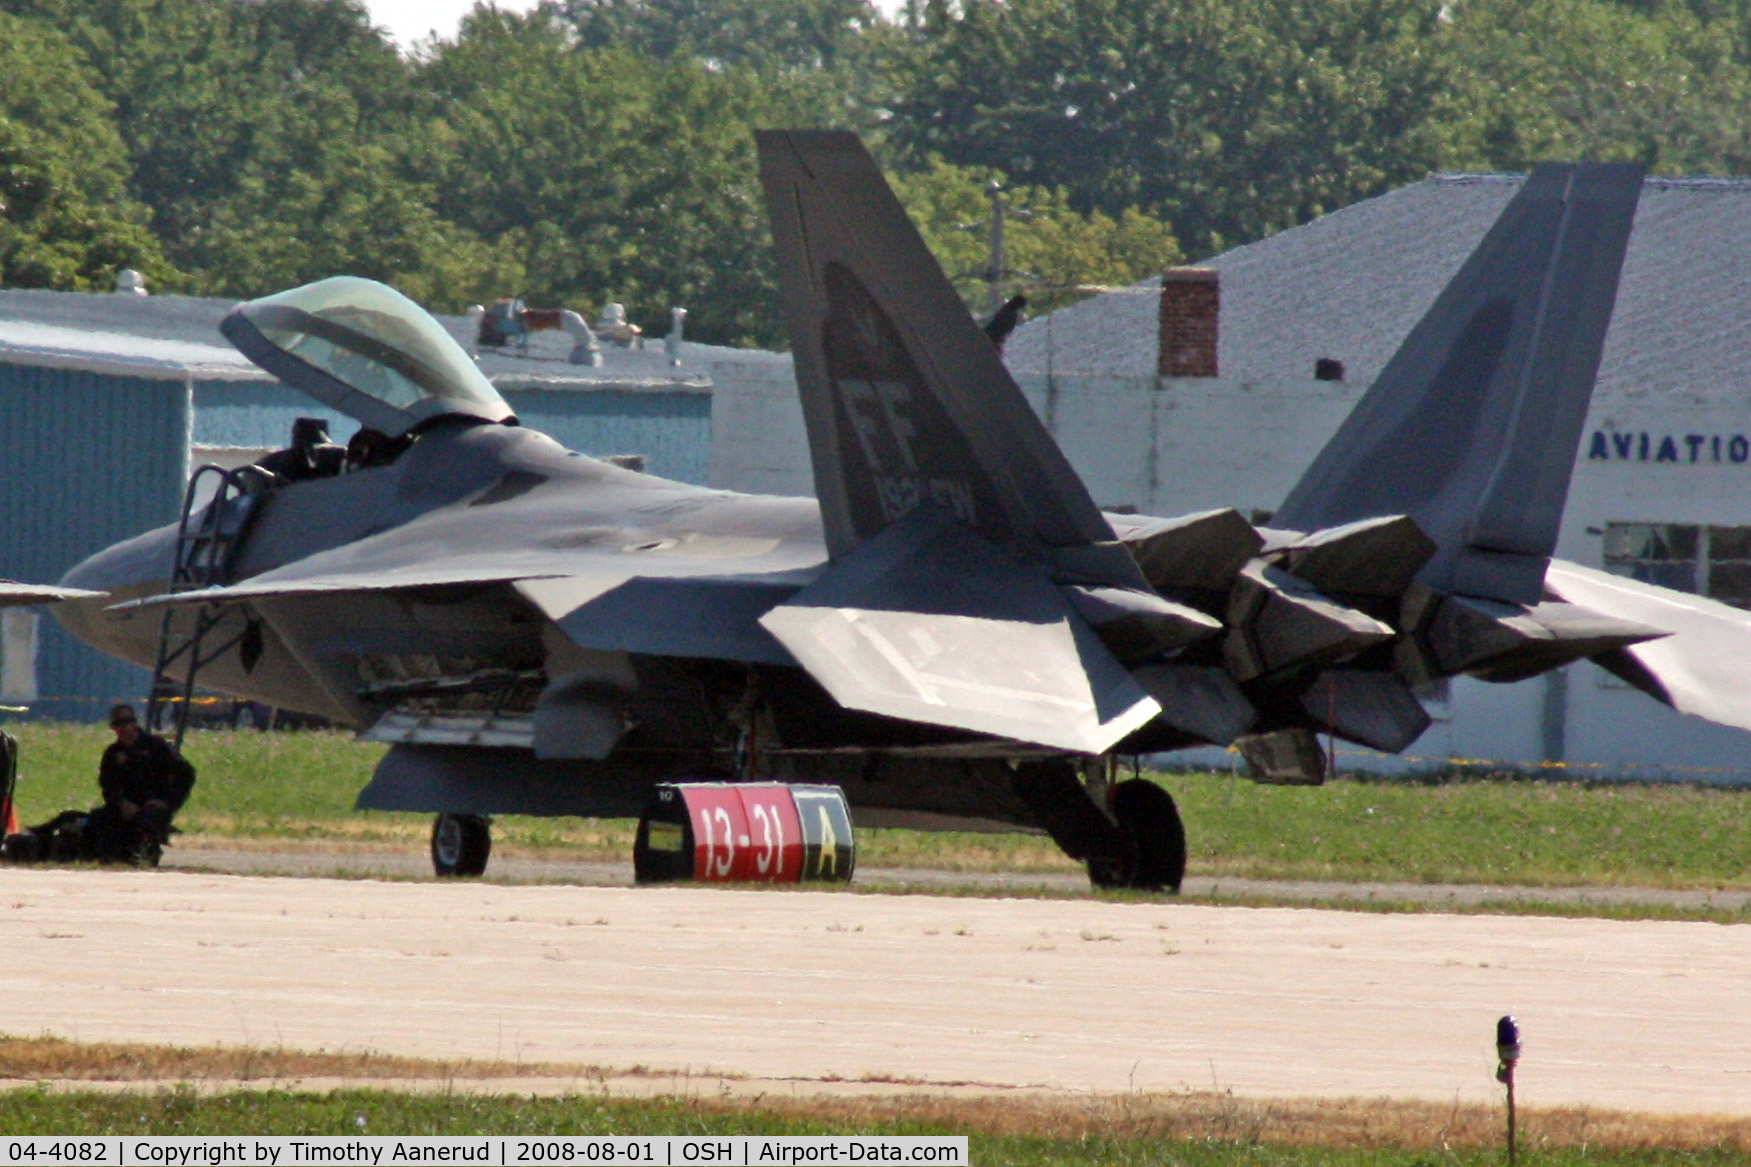 04-4082, 2004 Lockheed Martin F-22A Raptor C/N 4082, EAA AirVenture 2008, the F-22's were parked on the far side of the airfield